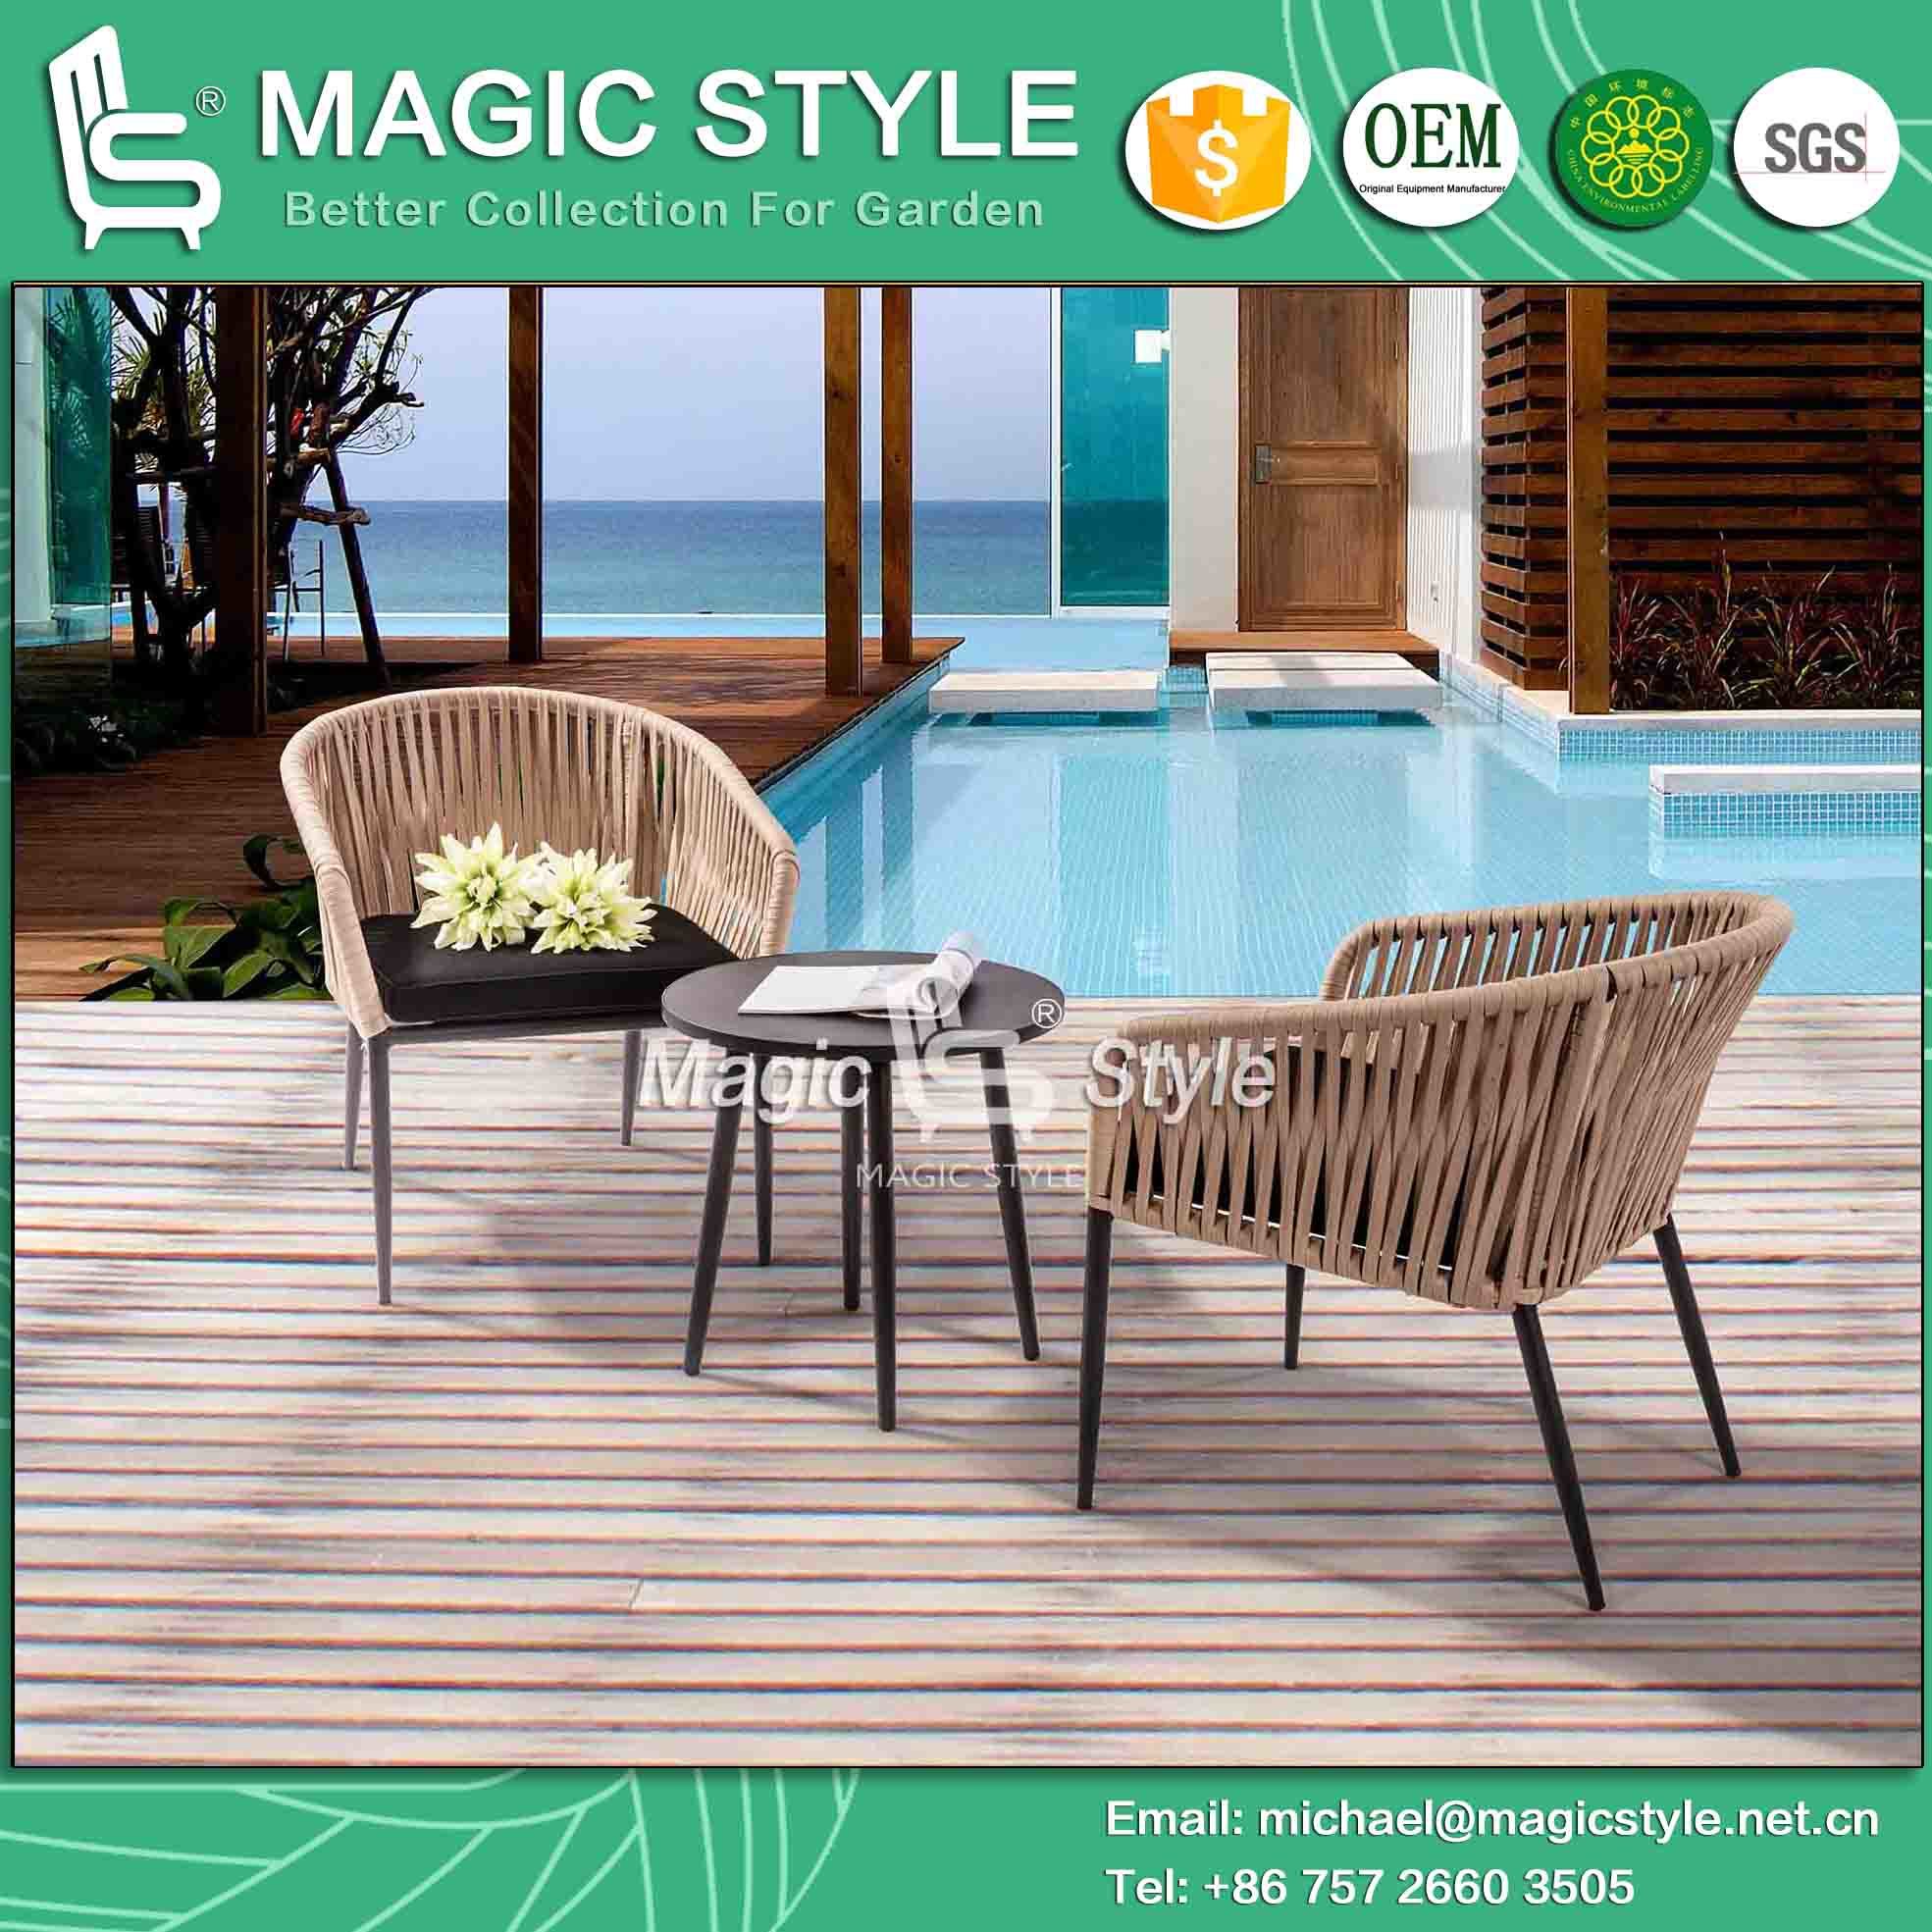 Tape Weaving Chair Bandage Chair Strip Furniture Aluminum Table (Magic Style)